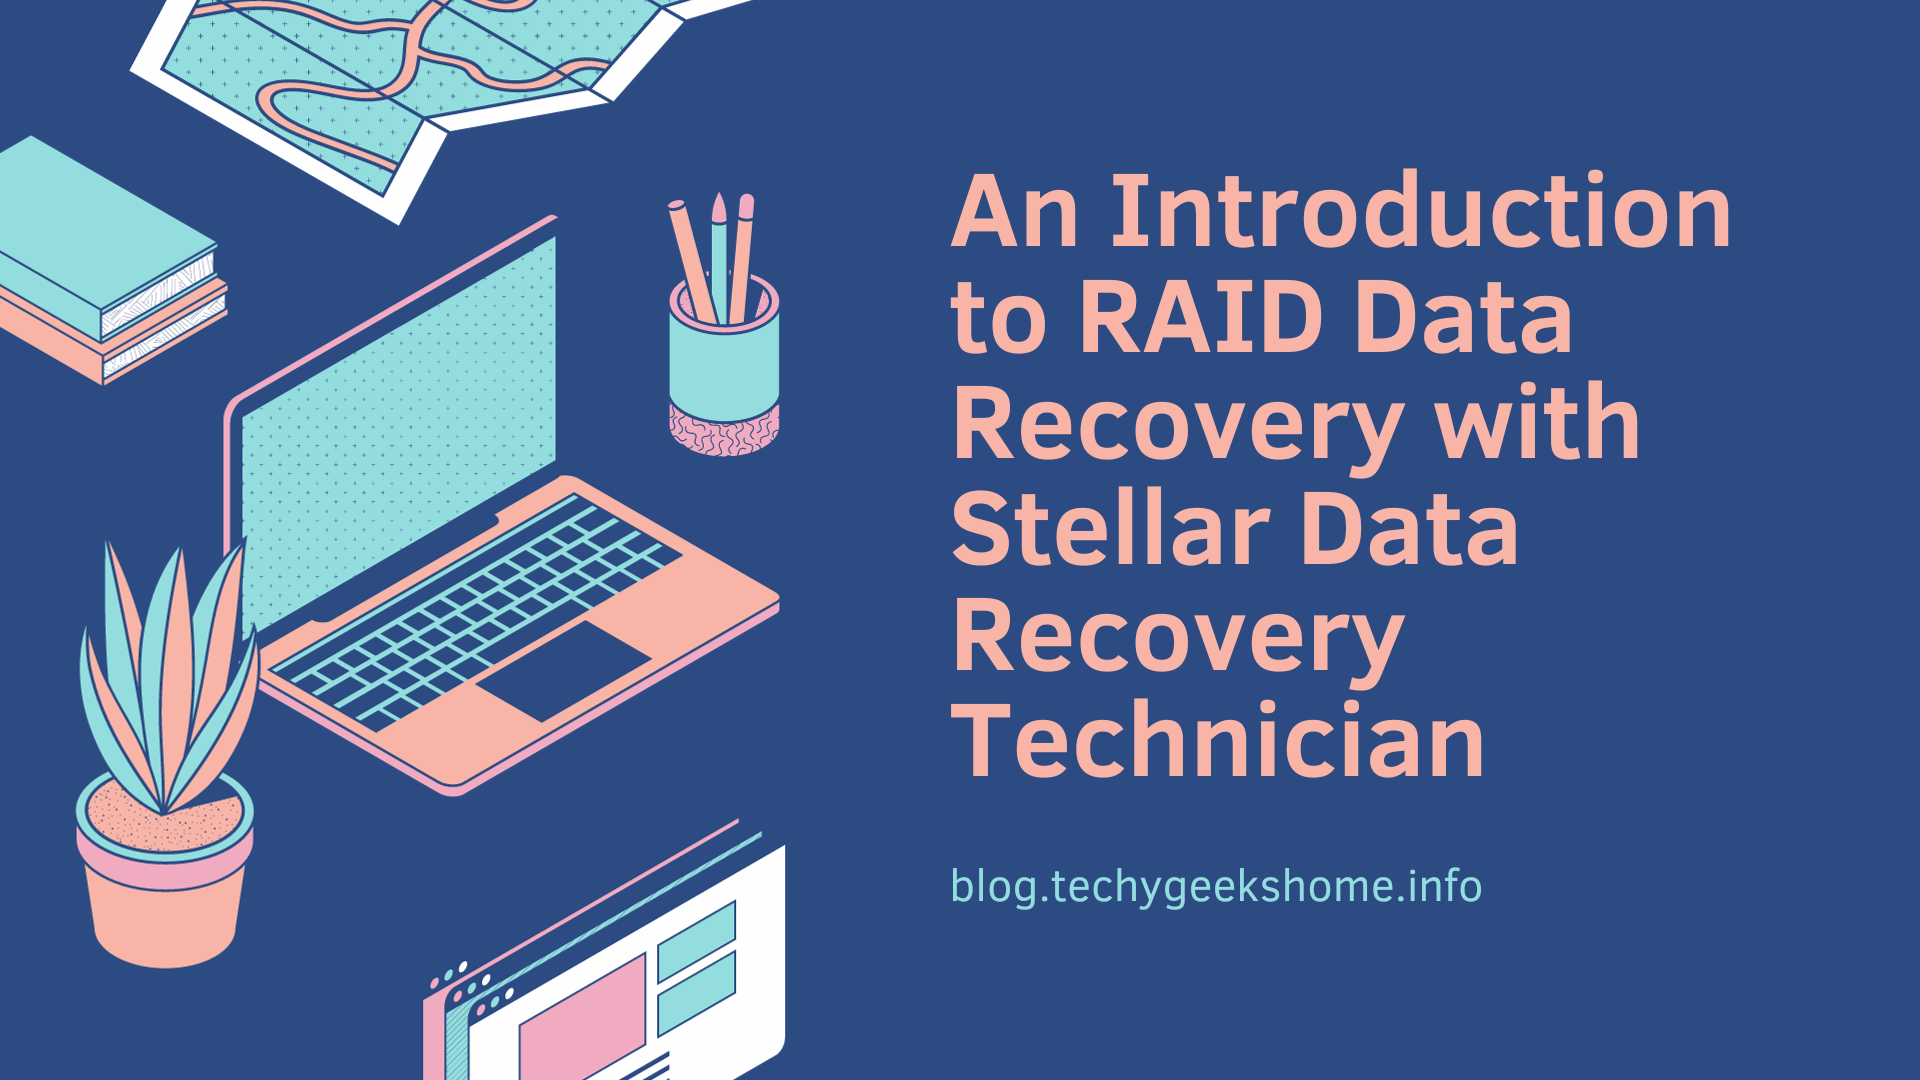 An Introduction to RAID Data Recovery with Stellar Data Recovery Technician 5